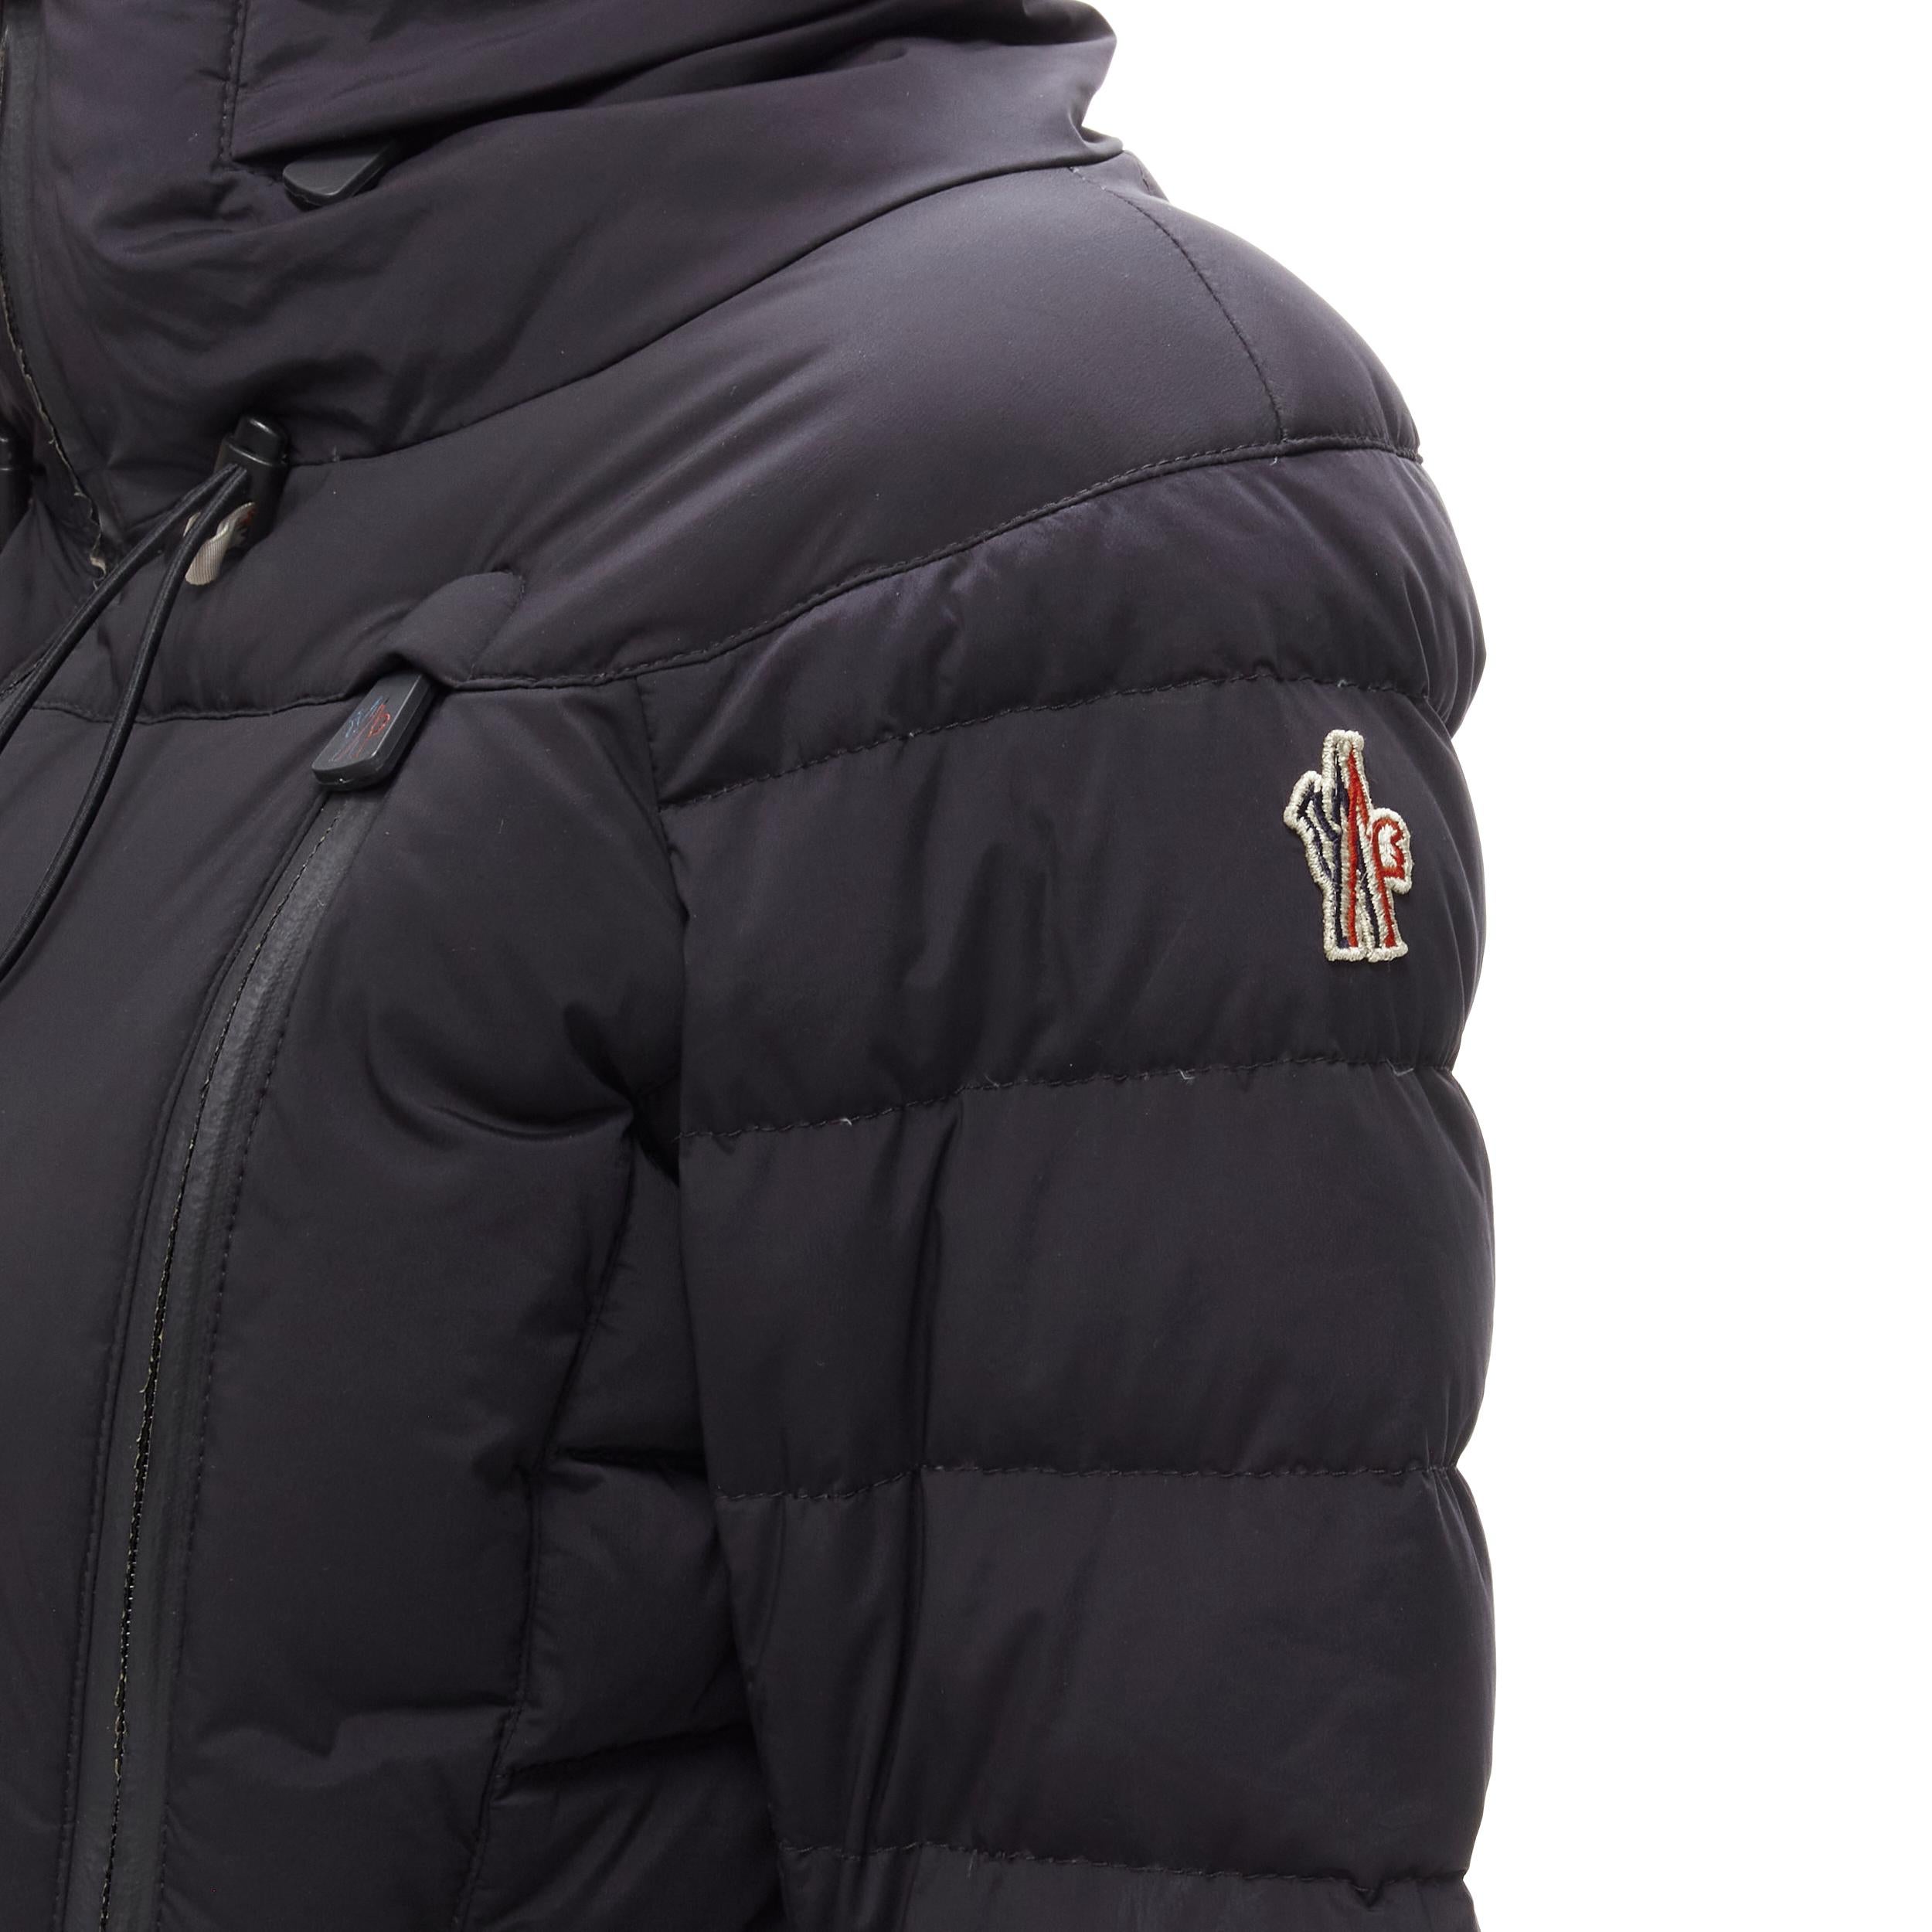 MONCLER GRENOBLE Bear Giubotto black nylon new down puffer jacket Size 1 S
Reference: JACG/A00049
Brand: Moncler Grenoble
Material: Nylon
Color: Black
Pattern: Solid
Extra Detail: Snap button at lining. Zipper pocket at lining. Packable hood under